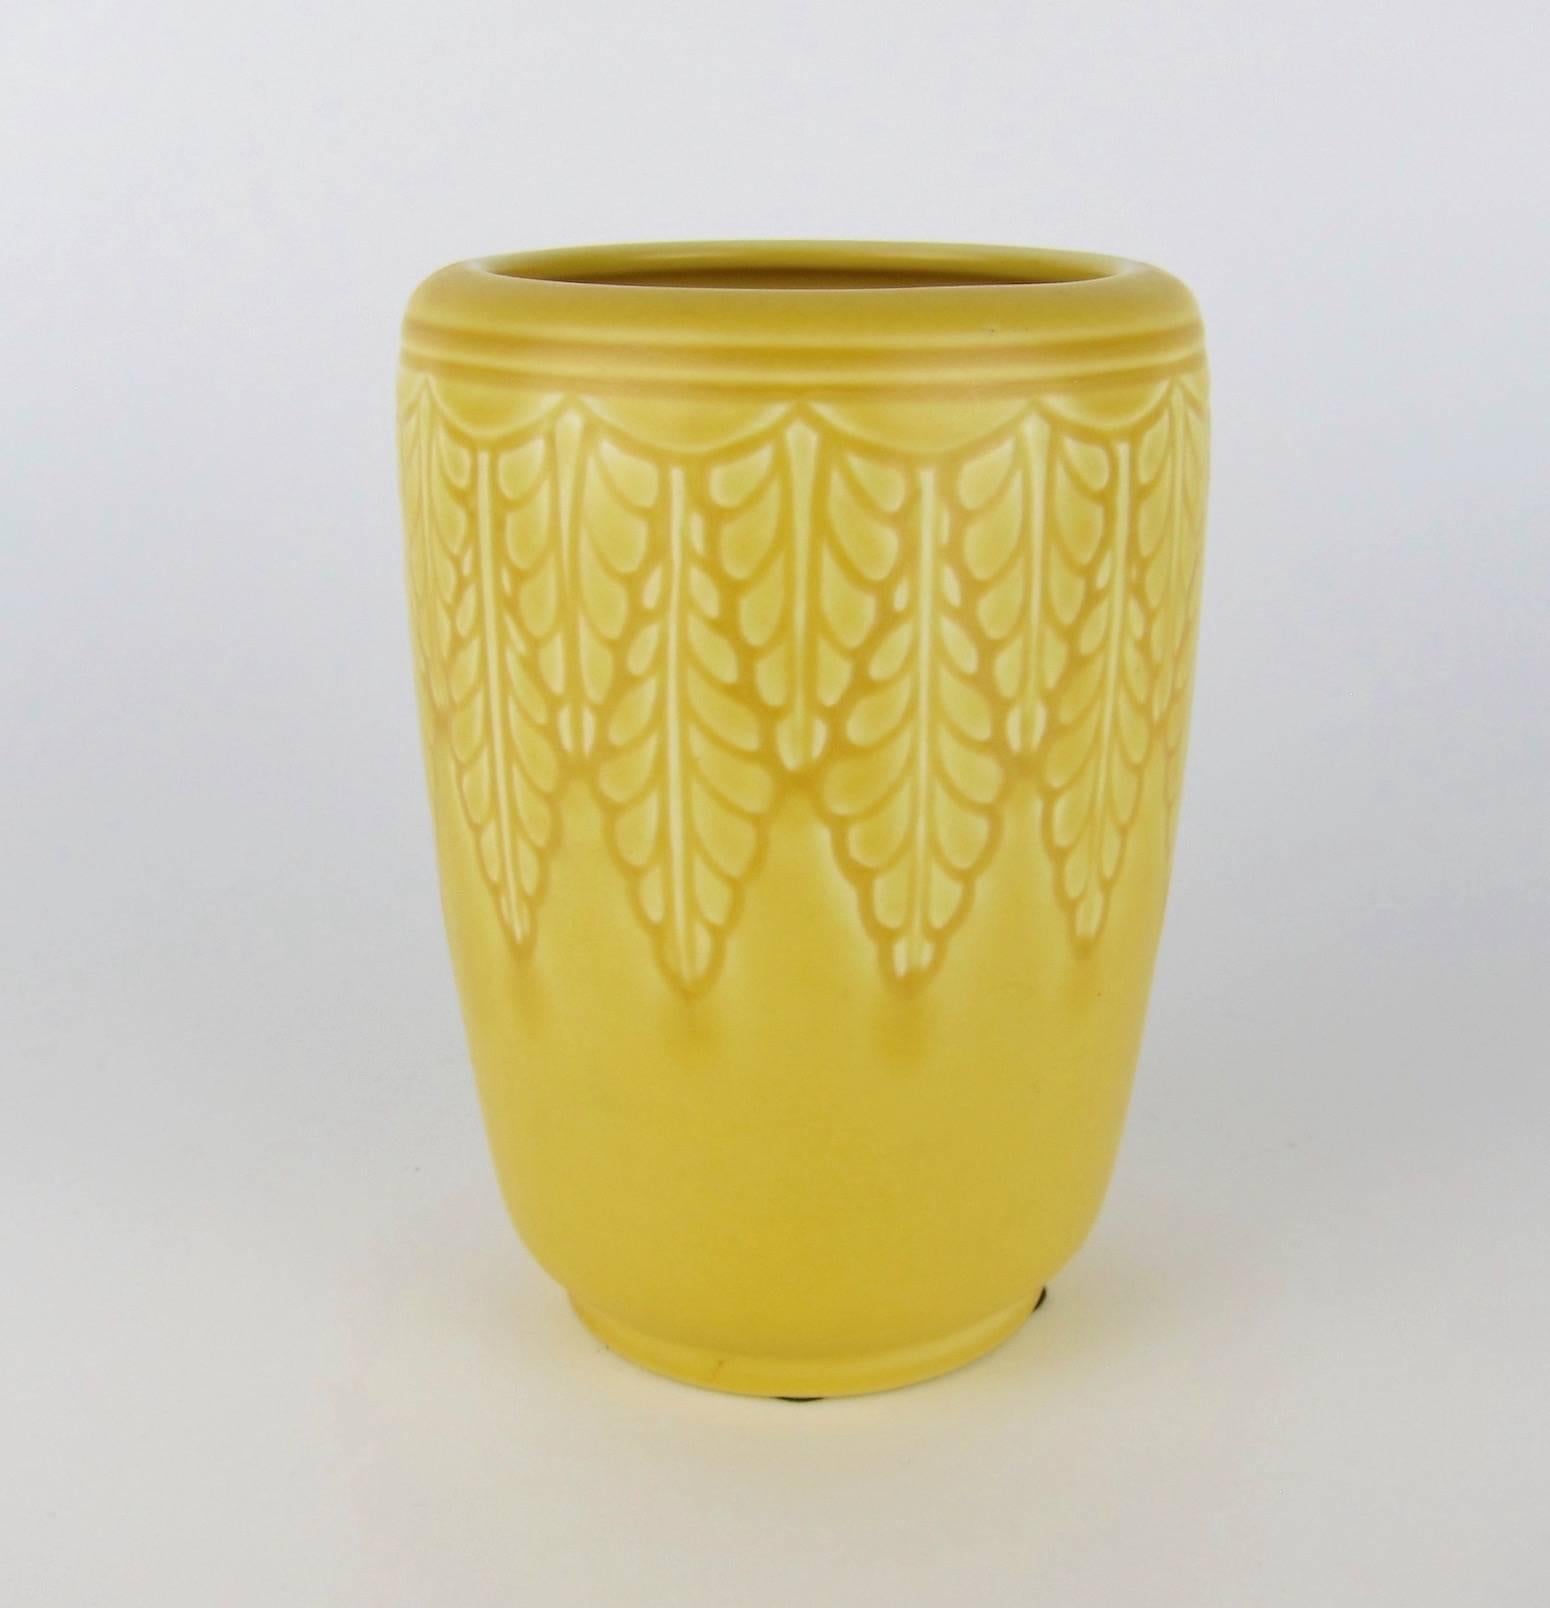 A vintage Rookwood Pottery production vase made in 1938. The American Arts & Crafts style vessel features molded foliate decoration glazed in sunny matte yellow. 

Very good condition, measuring 6.25 in. H x 4.25 in. Dia. (at widest). Rookwood's